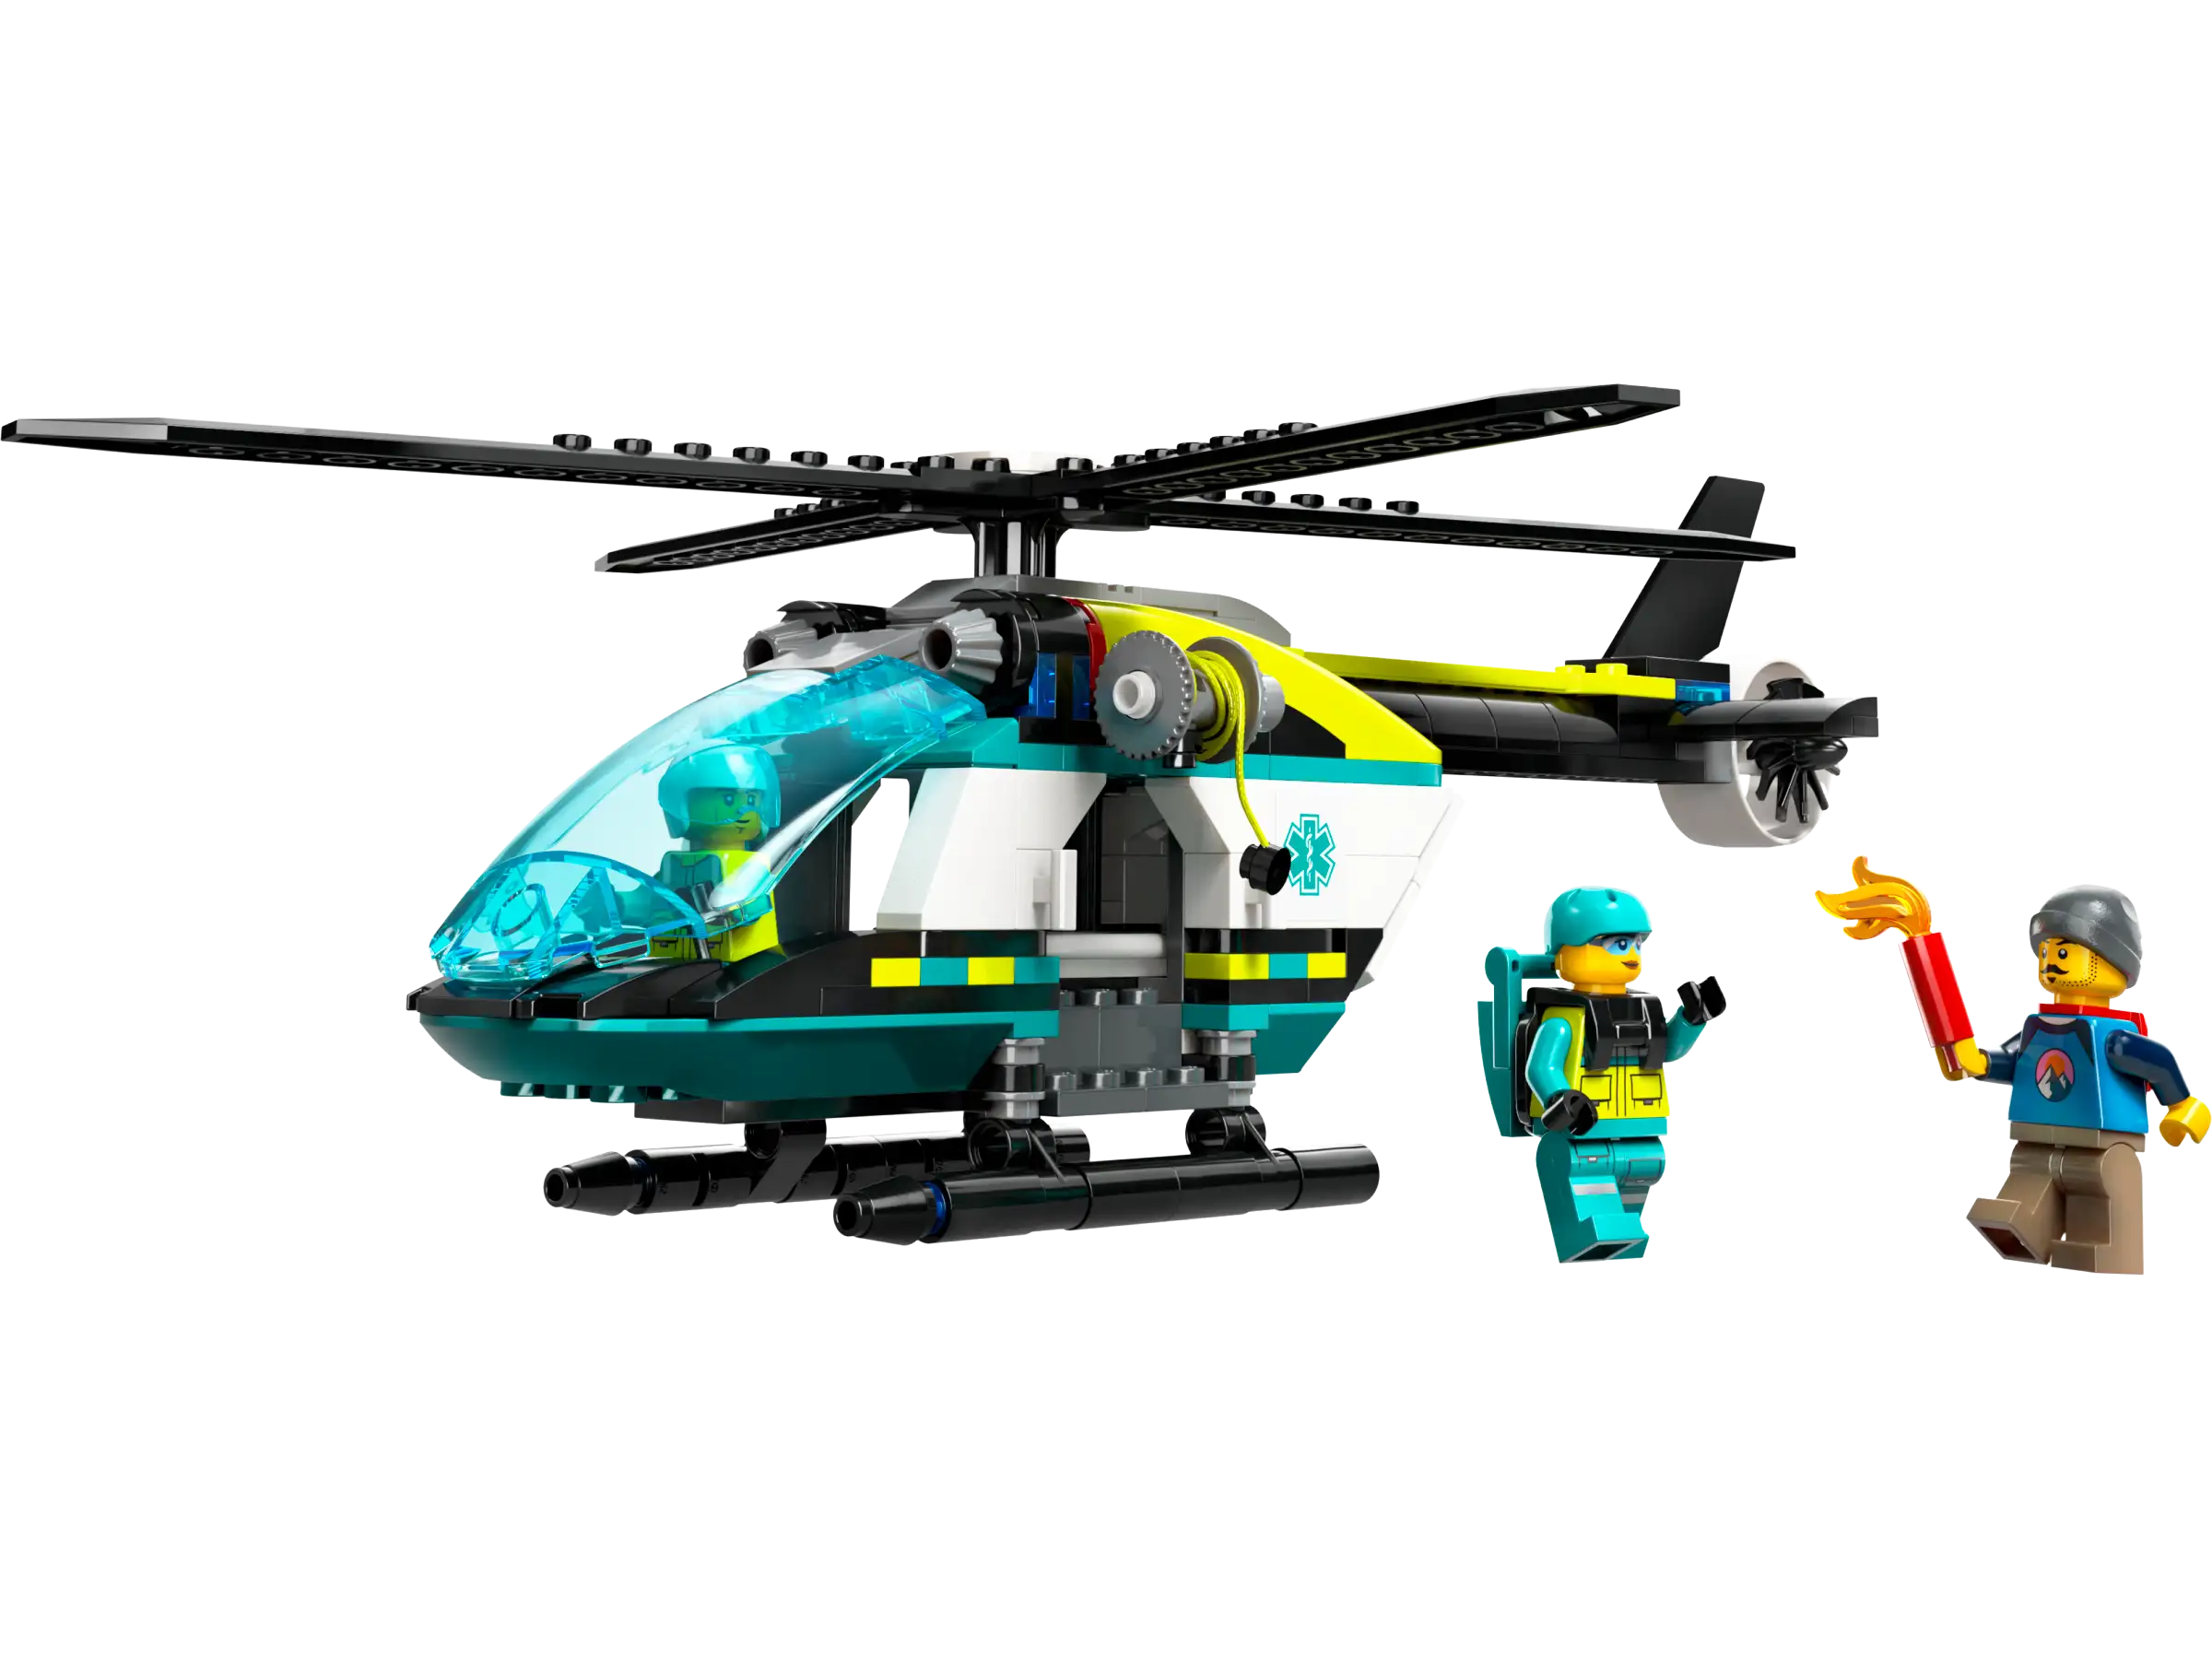 Lego - The emergency rescue helicopter